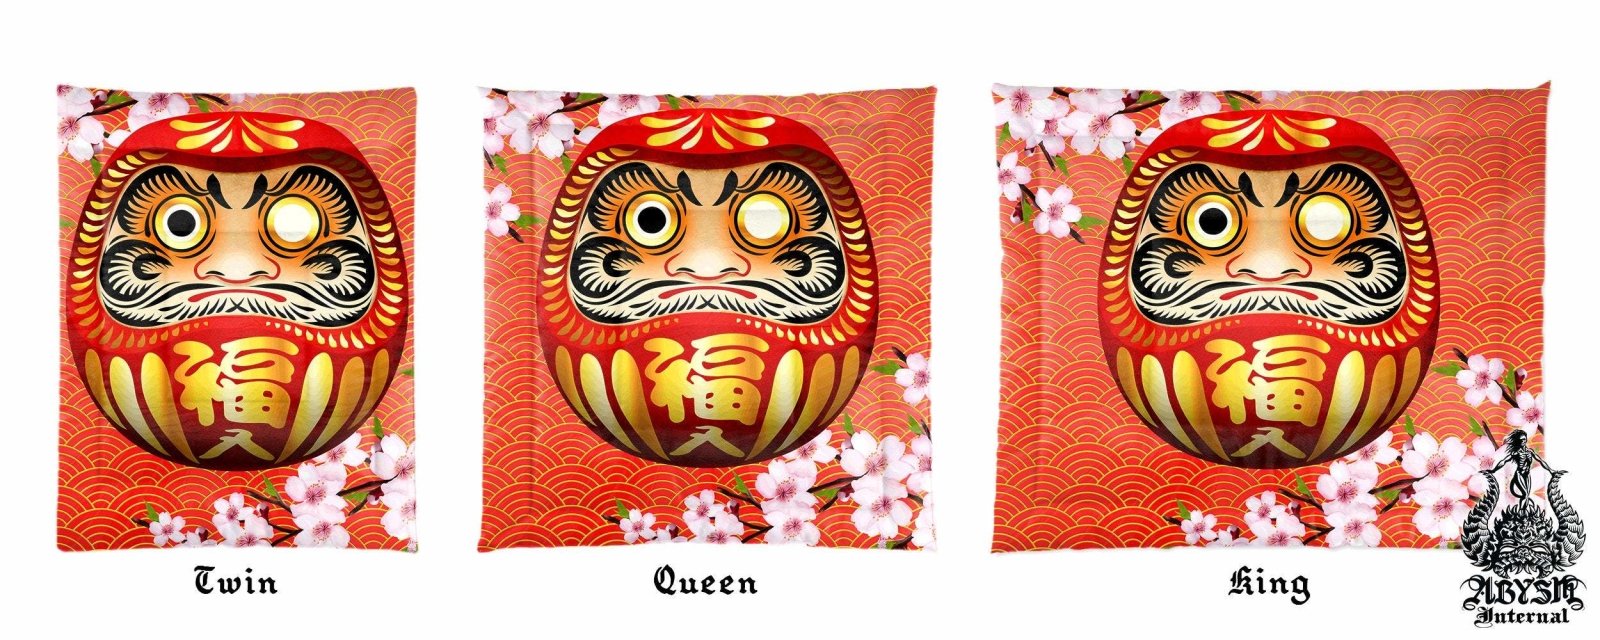 Daruma Bedding Set, Comforter and Duvet, Indie Bed Cover and Bedroom Decor, King, Queen and Twin Size - Red - Abysm Internal